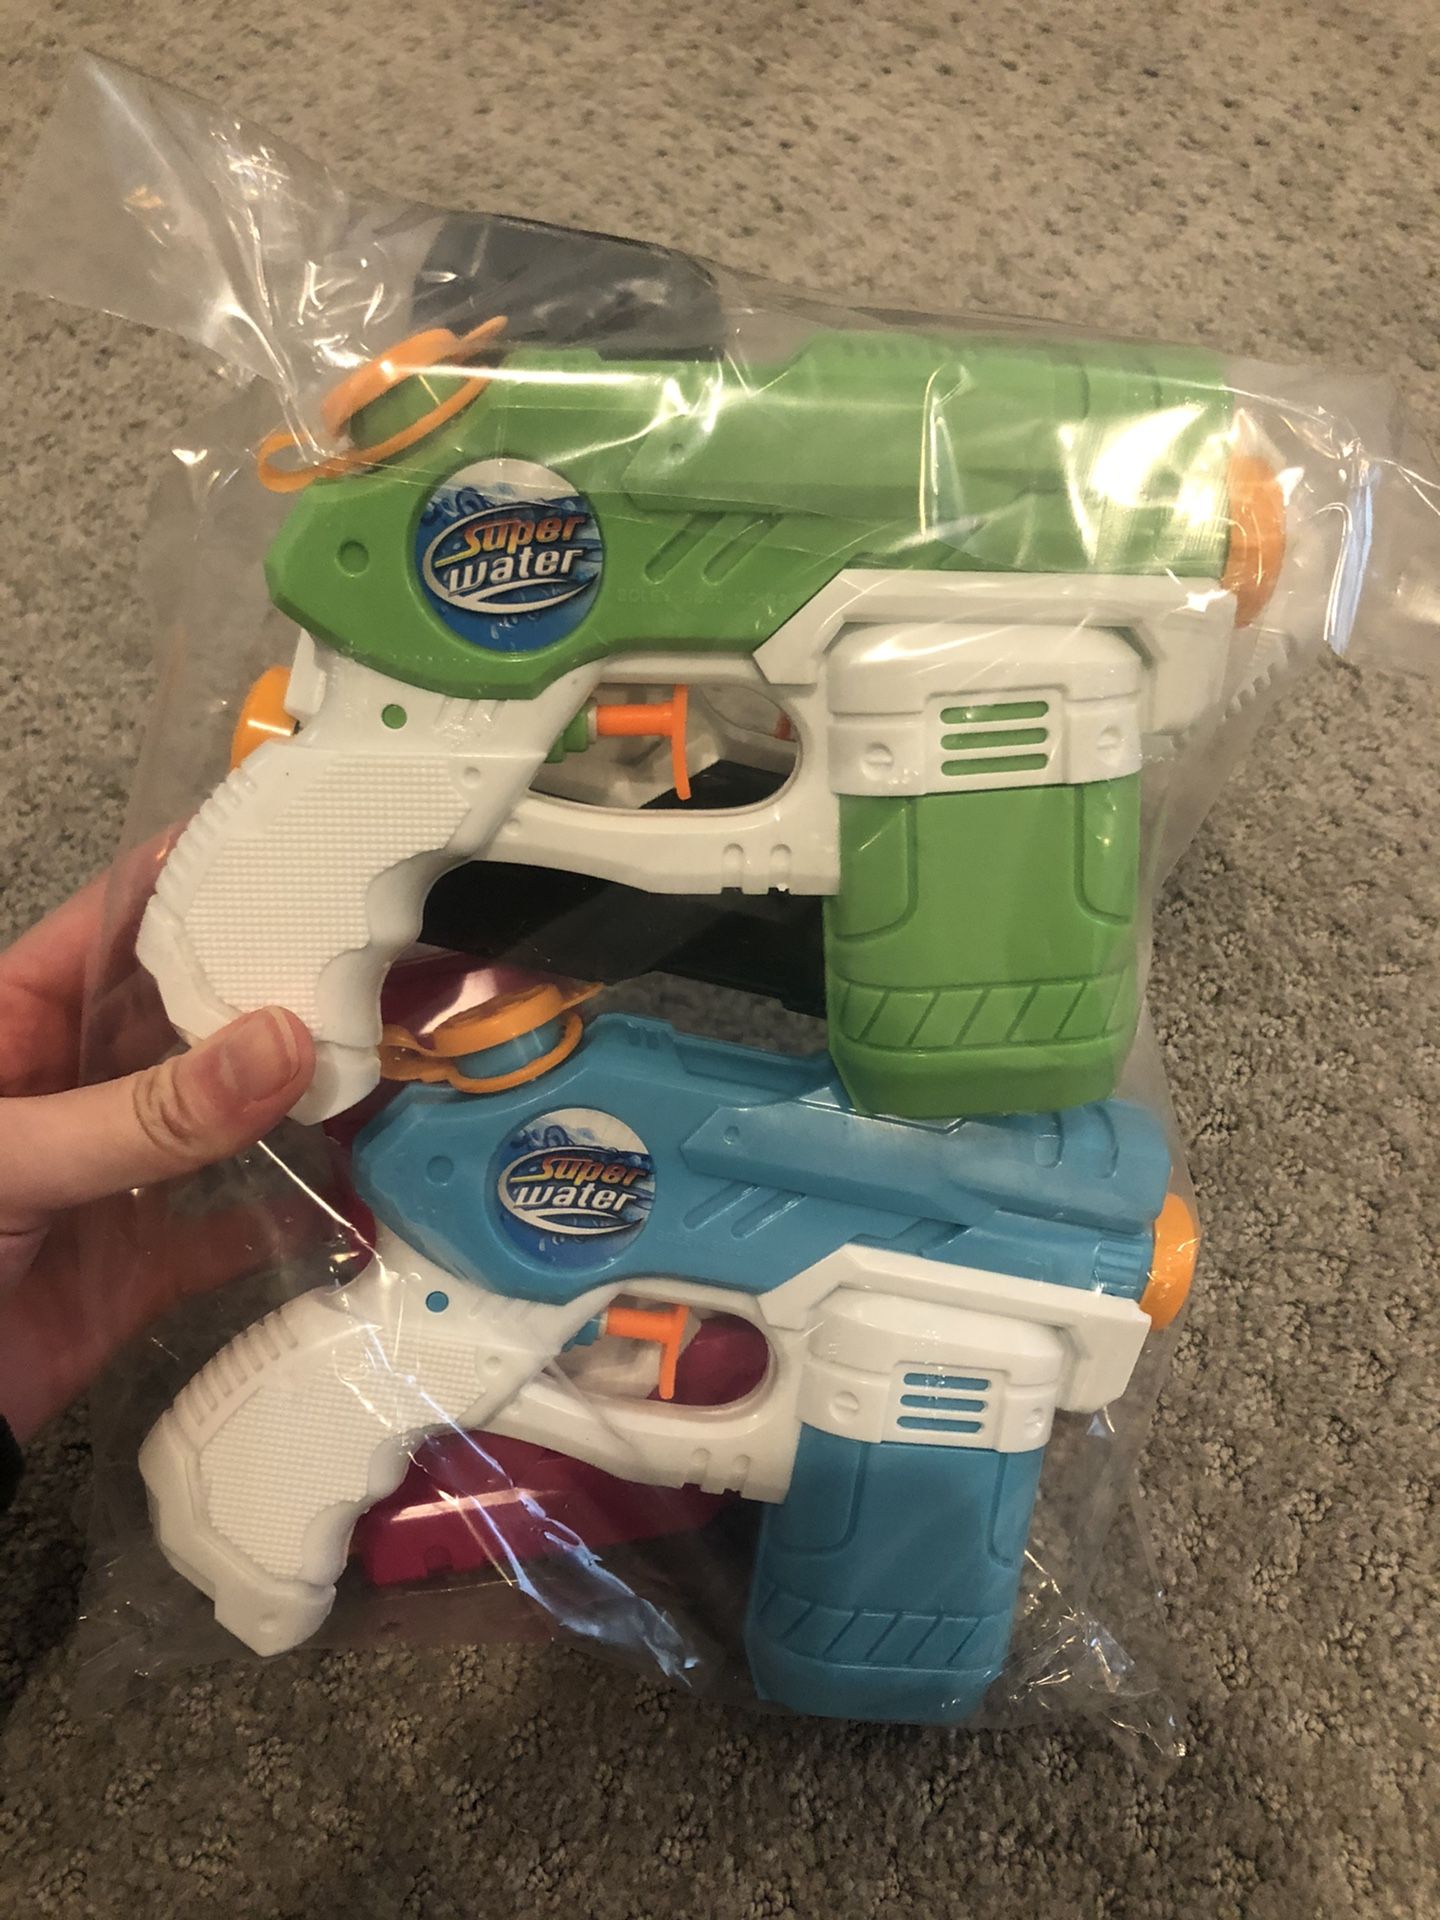 Brand new 4 Pack WaterGun for Kids Soaker Squirt Games Easy to Catch, Long Range, Water Pistol Toy for birthday Party backyard game summer